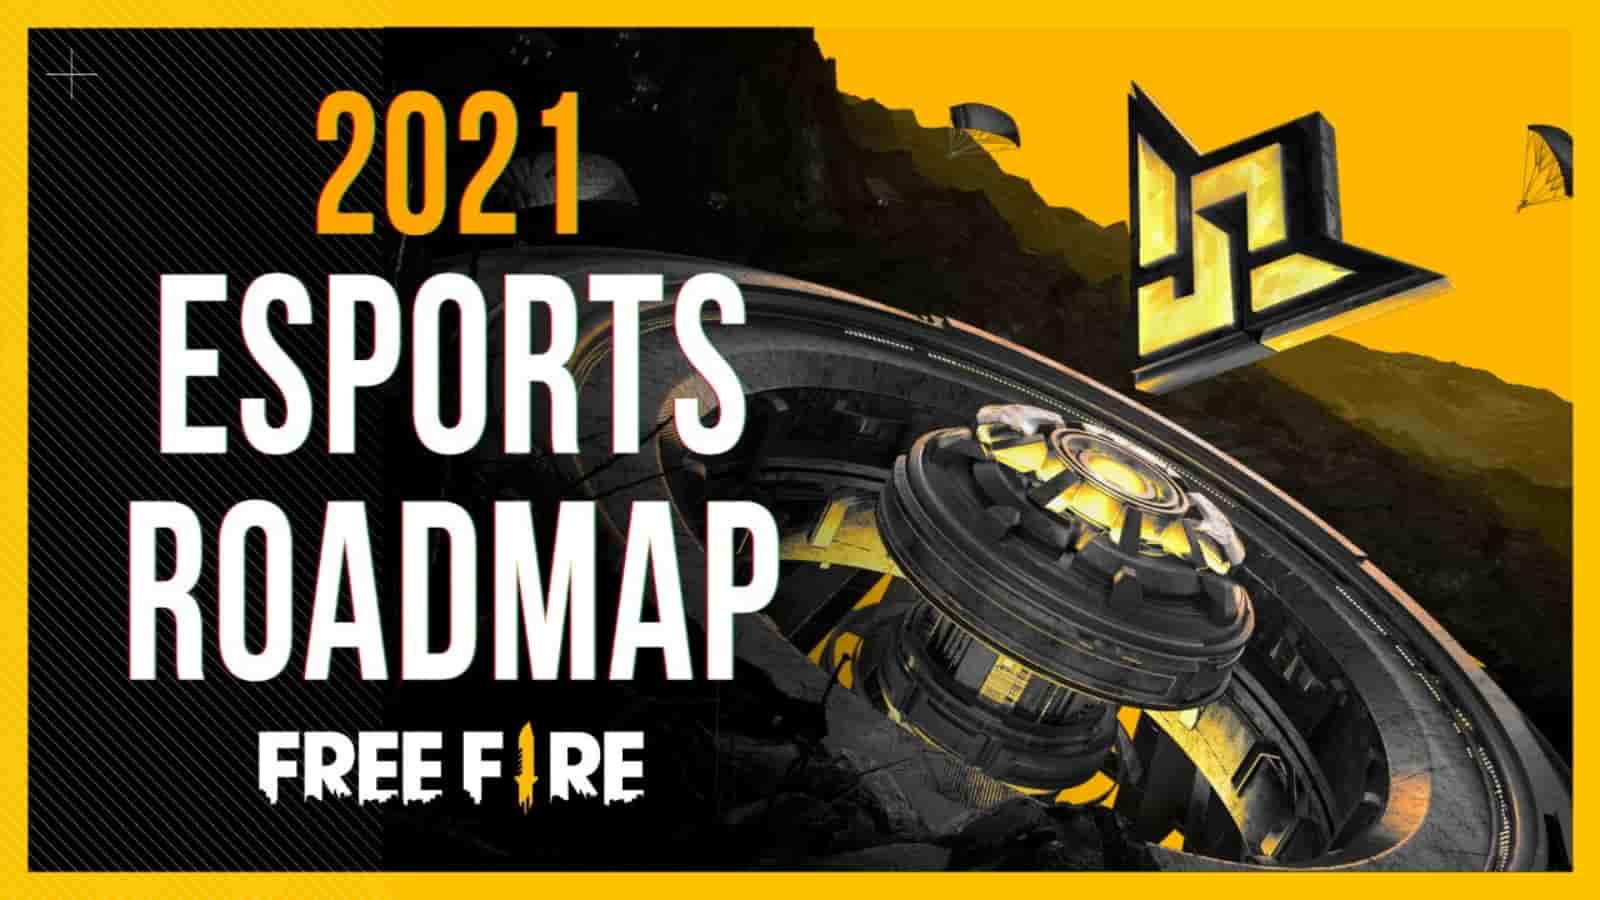 In November 2021, Free Fire Asia Championships 2021 and the EMEA Invitational 2021 will be held online